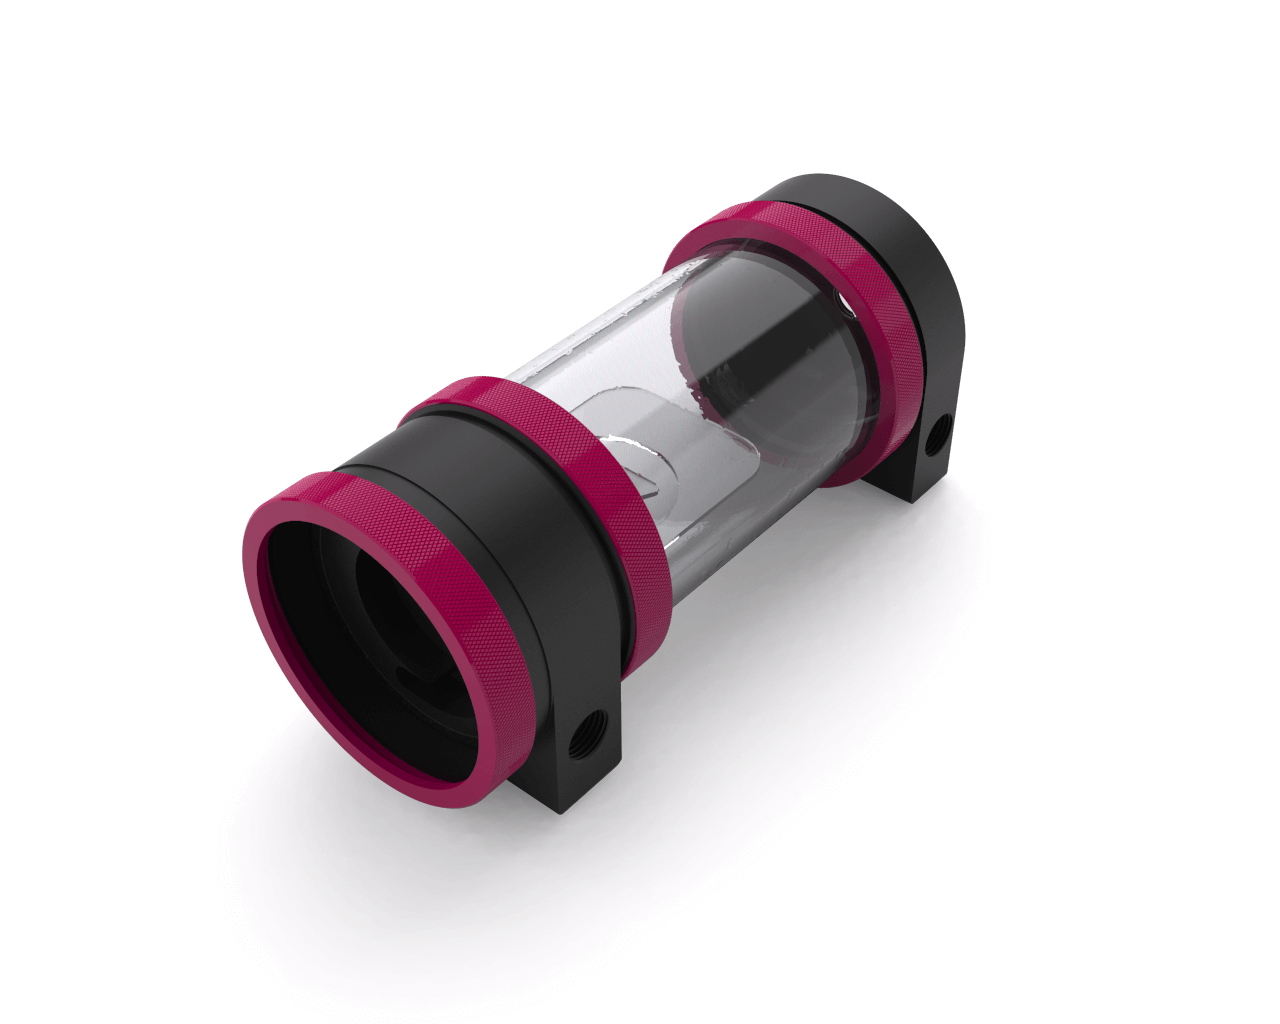 PrimoChill CTR Hard Mount Phase II High Flow D5 Enabled Reservoir - Black POM - 120mm - PrimoChill - KEEPING IT COOL Magenta